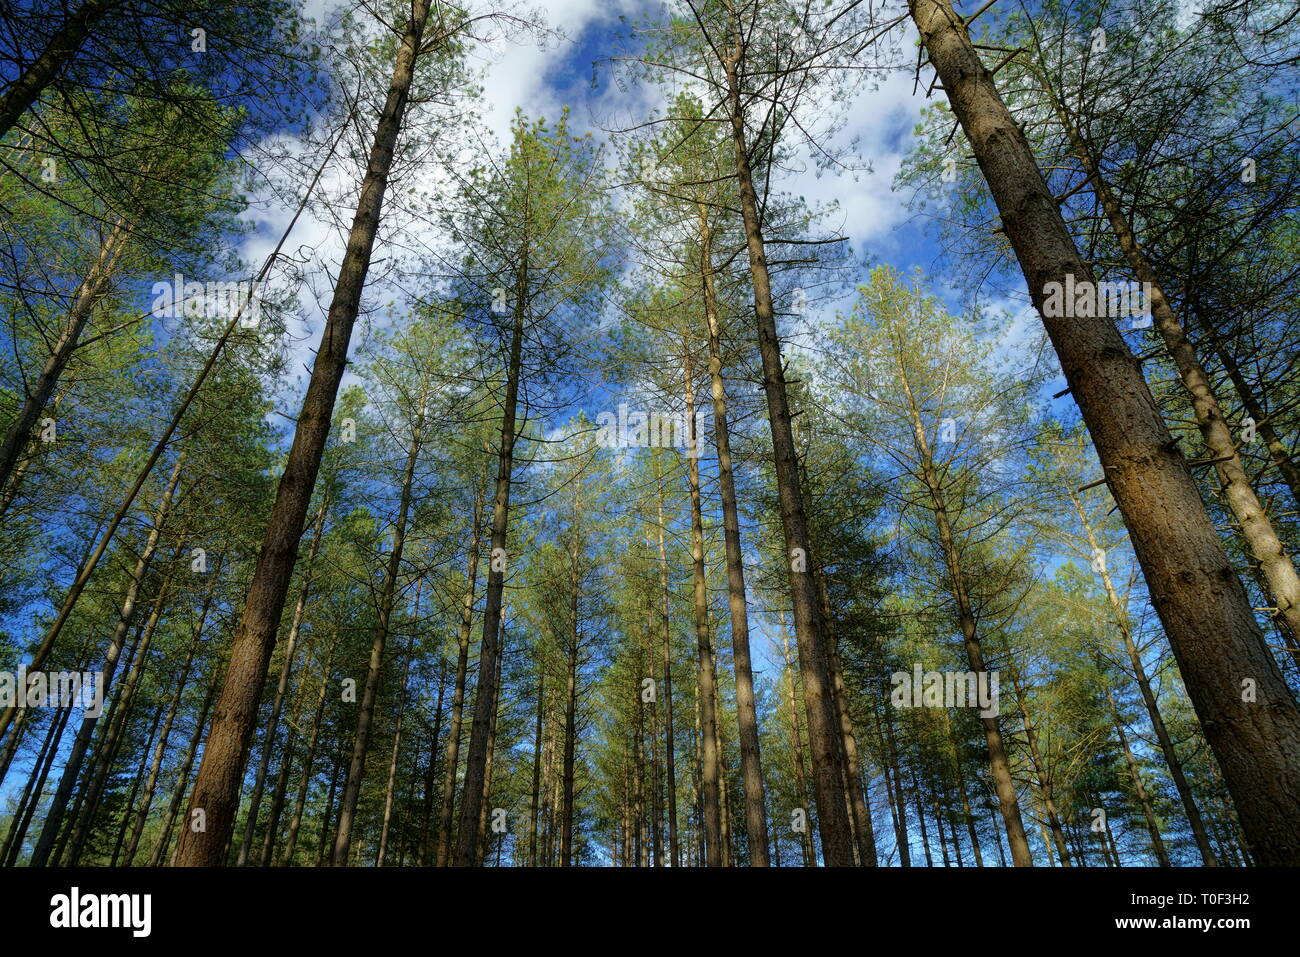 A plantation of Corsican pines with clouds and blue sky. Stock Photo